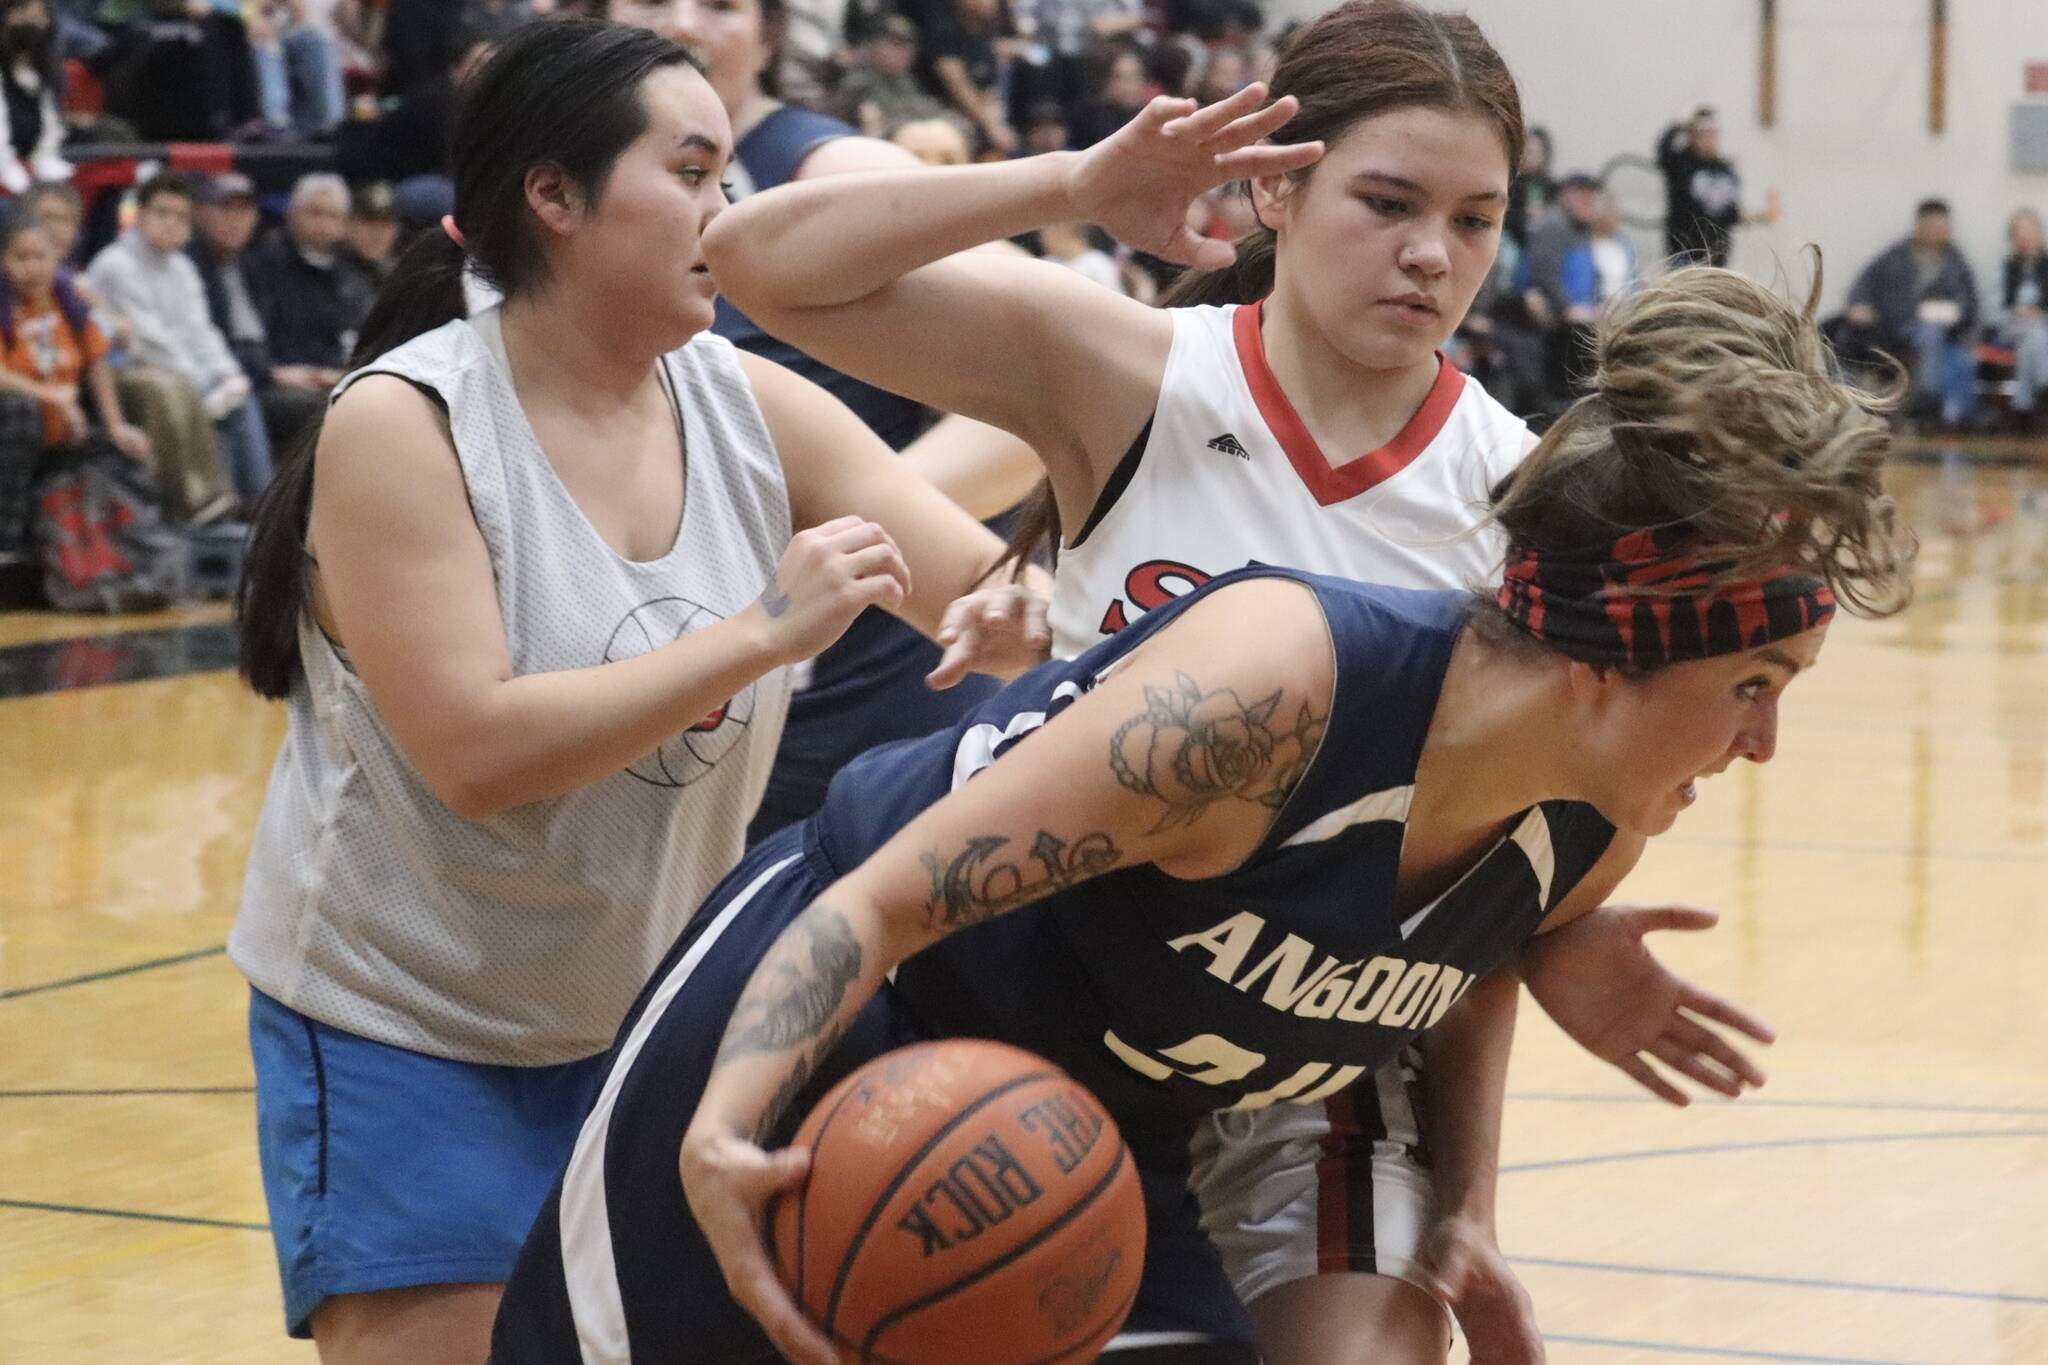 Angoon’s Ladonna Byers fights for the rebound against Hoonah on Wednesday night for an elimination game in the W bracket for this year’s Gold Medal basketball tournament. Byers would finish the game with 11 points. (Jonson Kuhn / Juneau Empire)